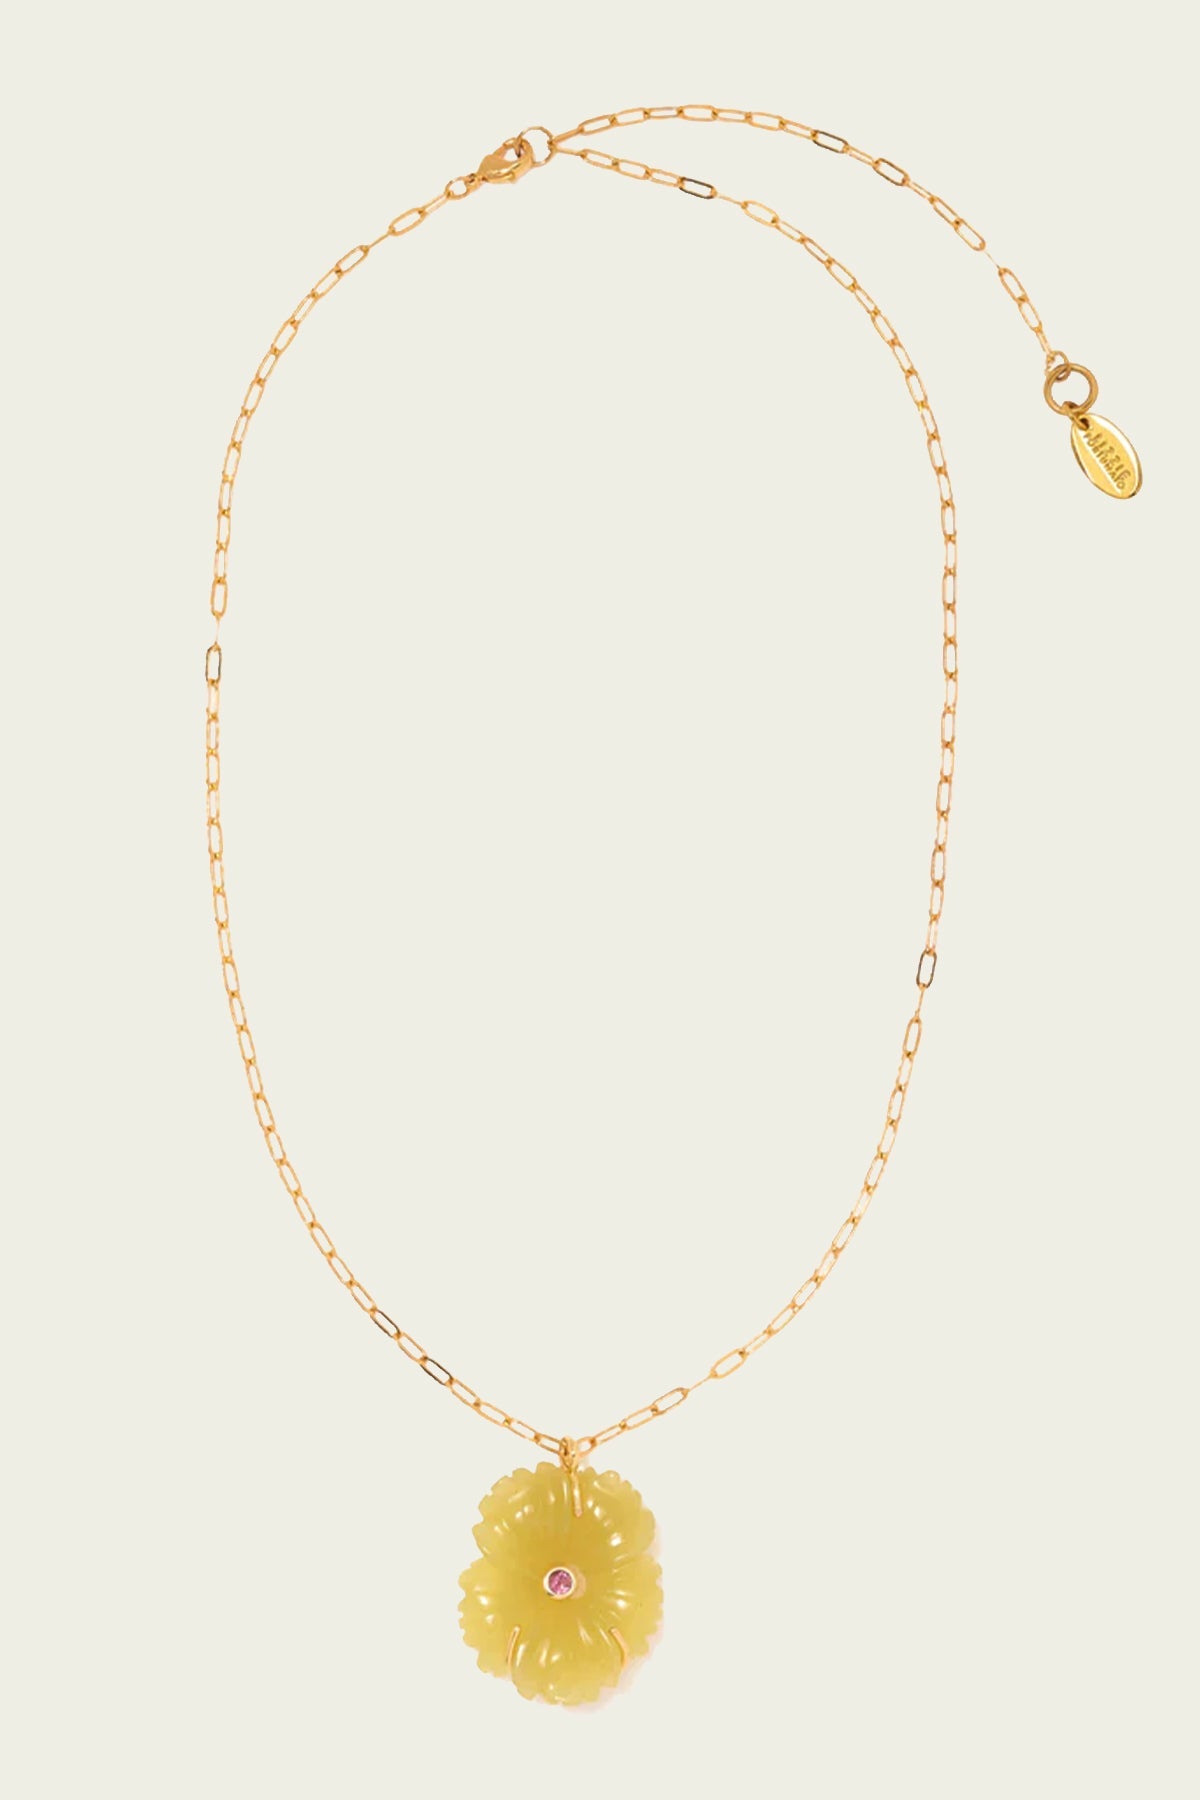 New Bloom Necklace in Canary - shop-olivia.com